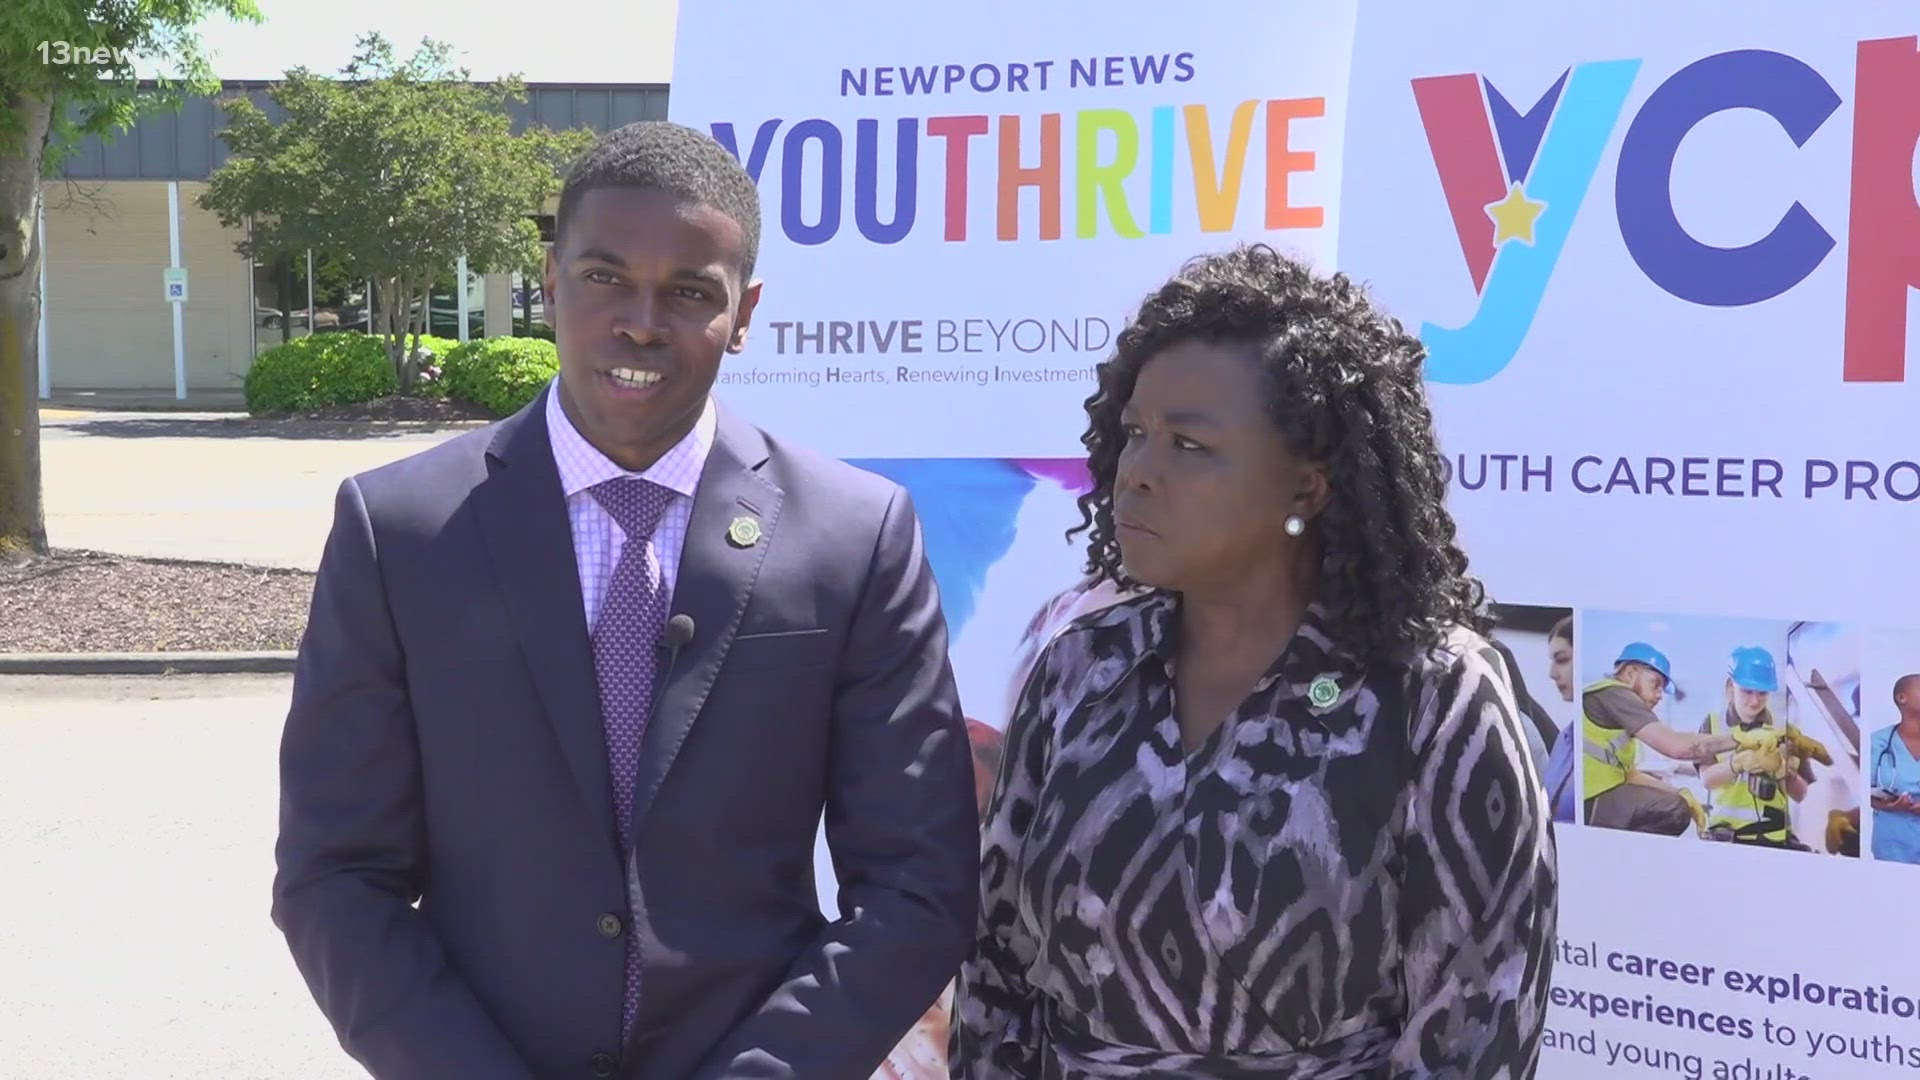 The City of Newport News has announced a multi-million-dollar youth initiative program.